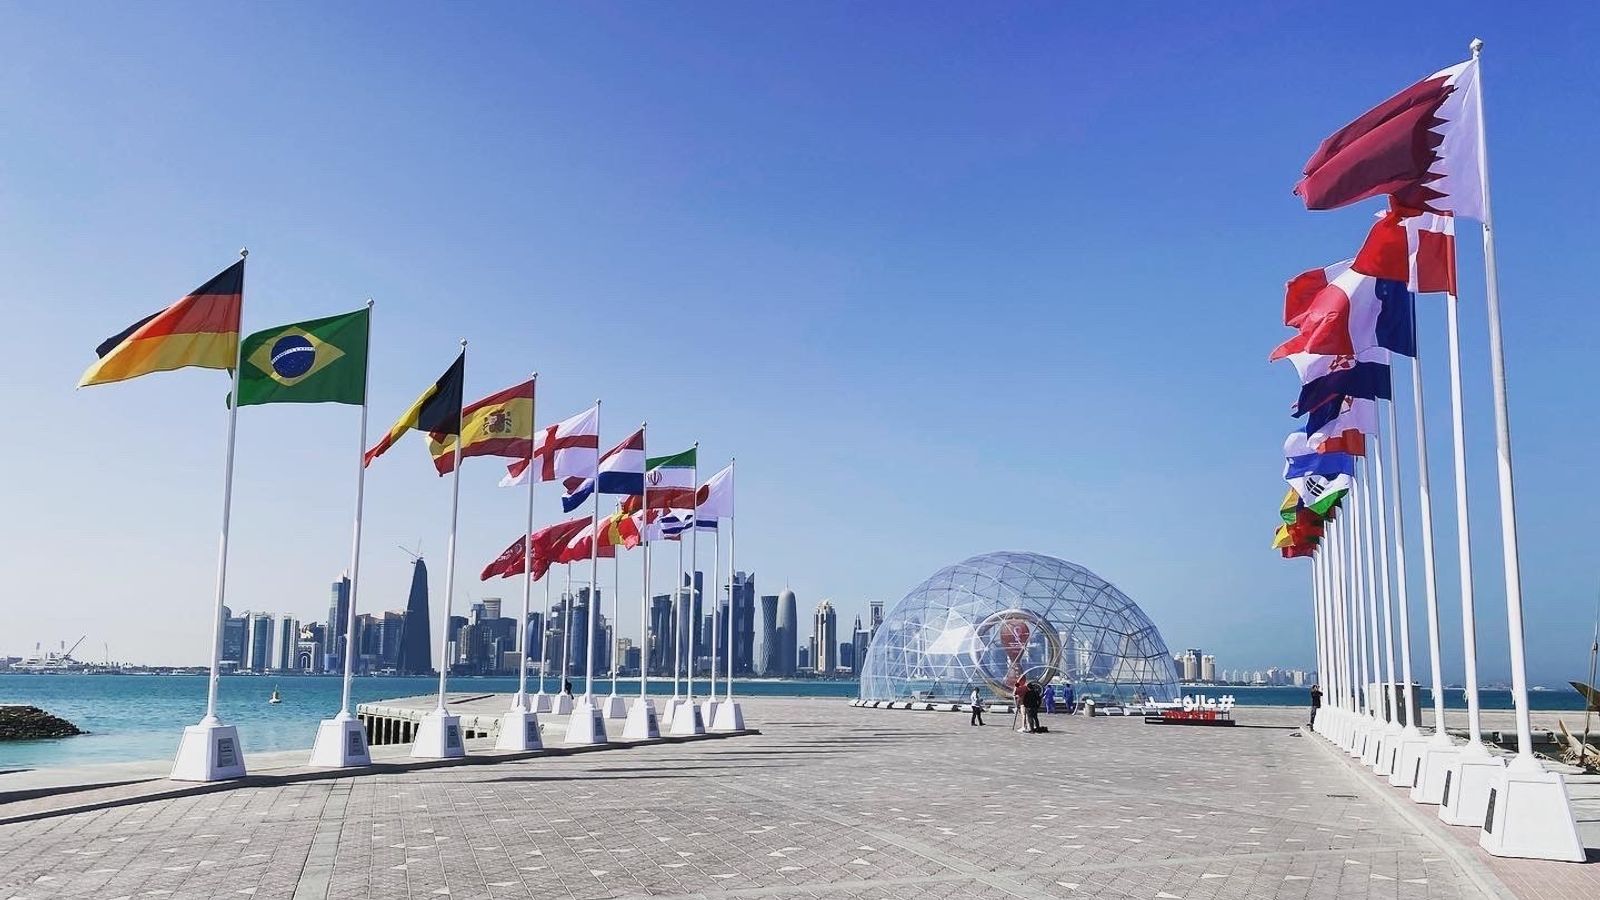 Qatar World Cup 2022: Some hotels refuse to accept same-sex couples, according to investigation